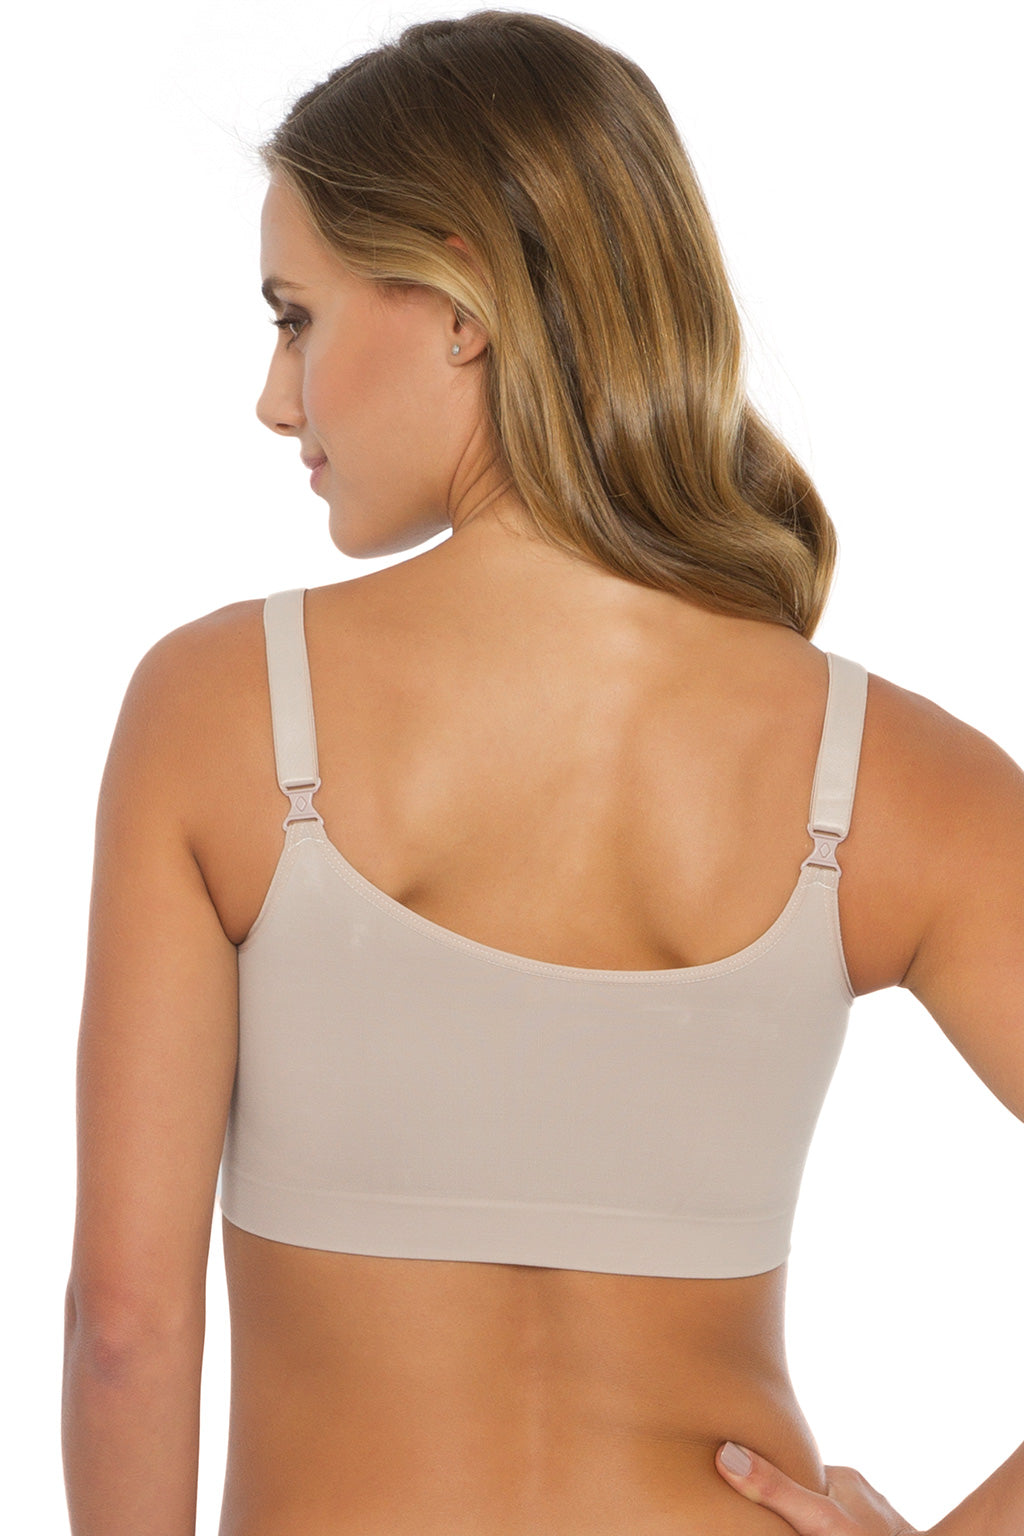 Shop Back Smoothing Bra by Leading Lady